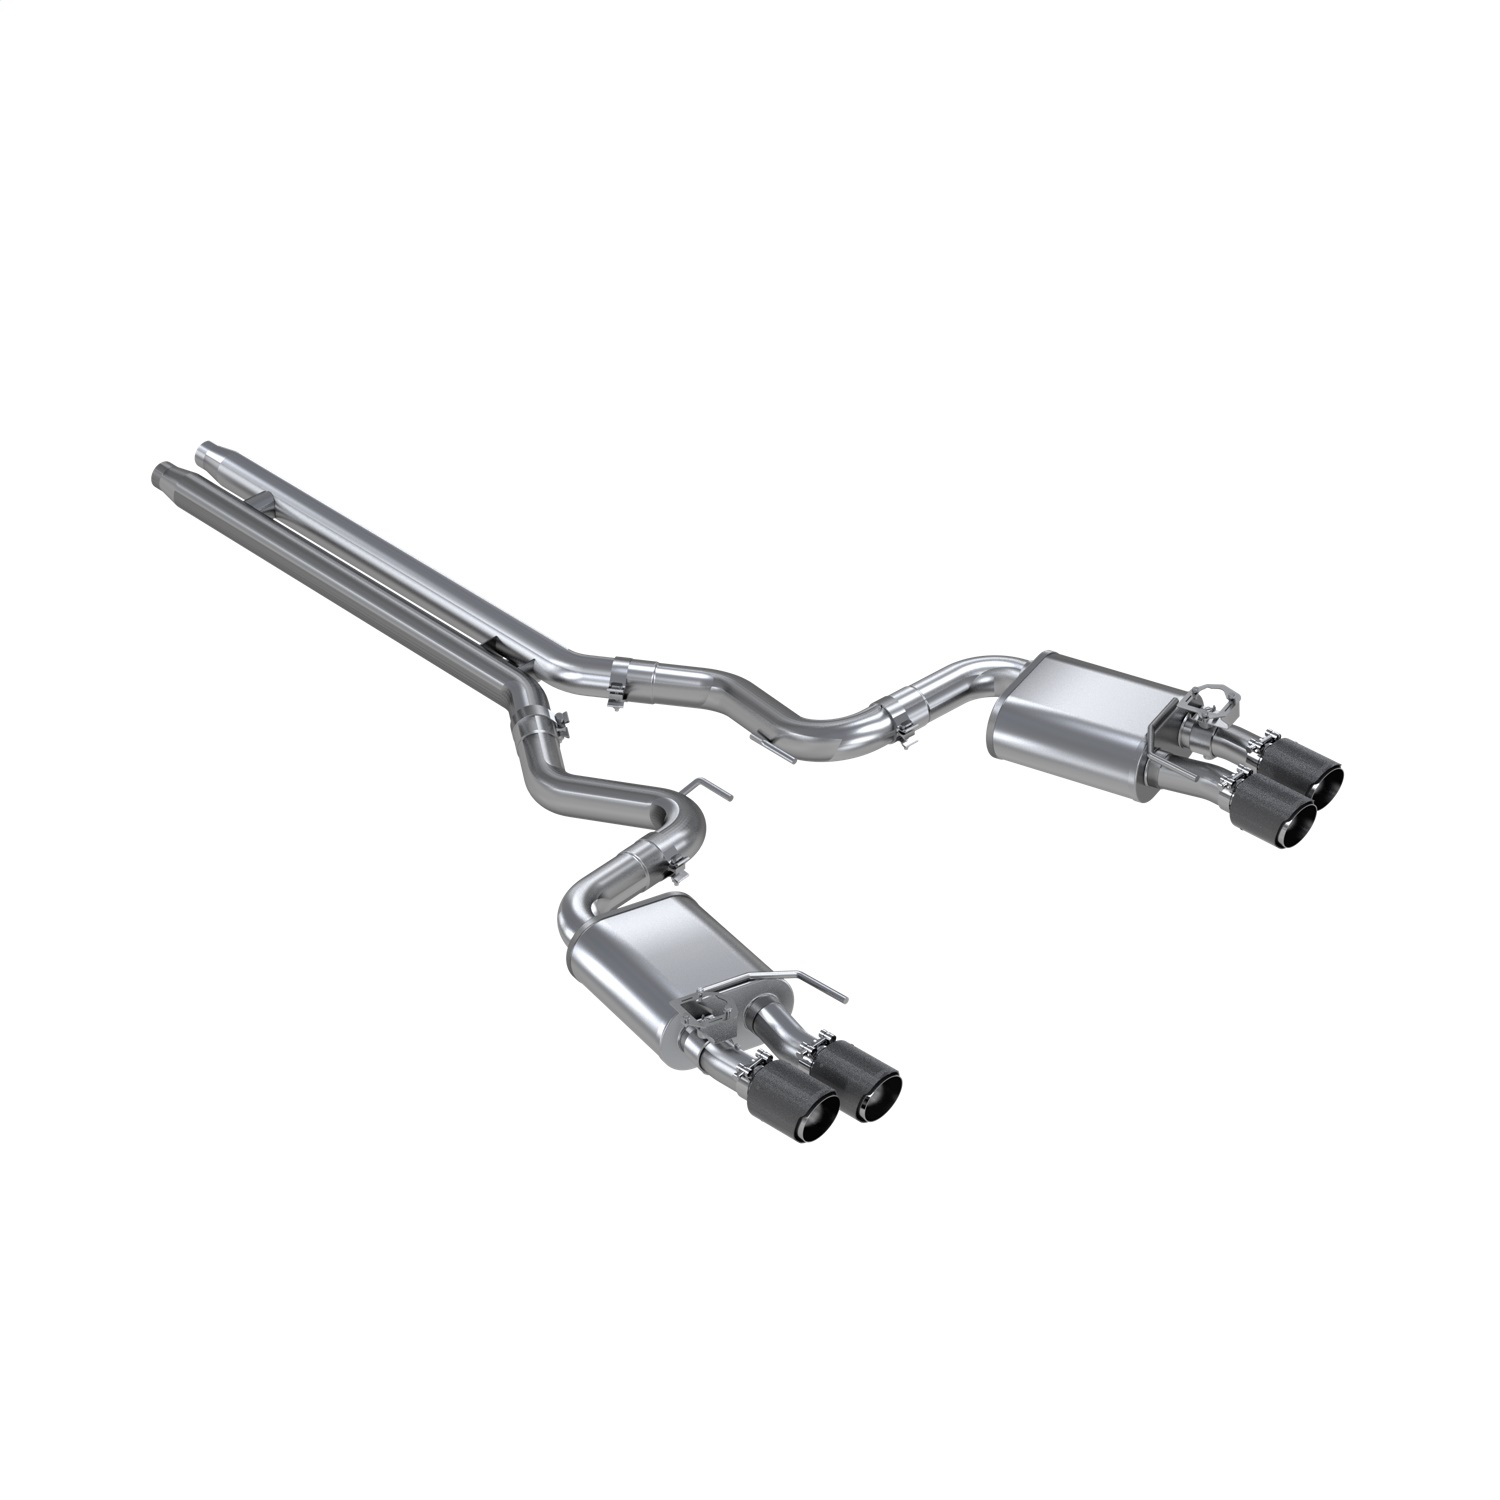 MBRP Exhaust S72093CF Armor Pro Cat Back Exhaust System Fits 18-23 Mustang